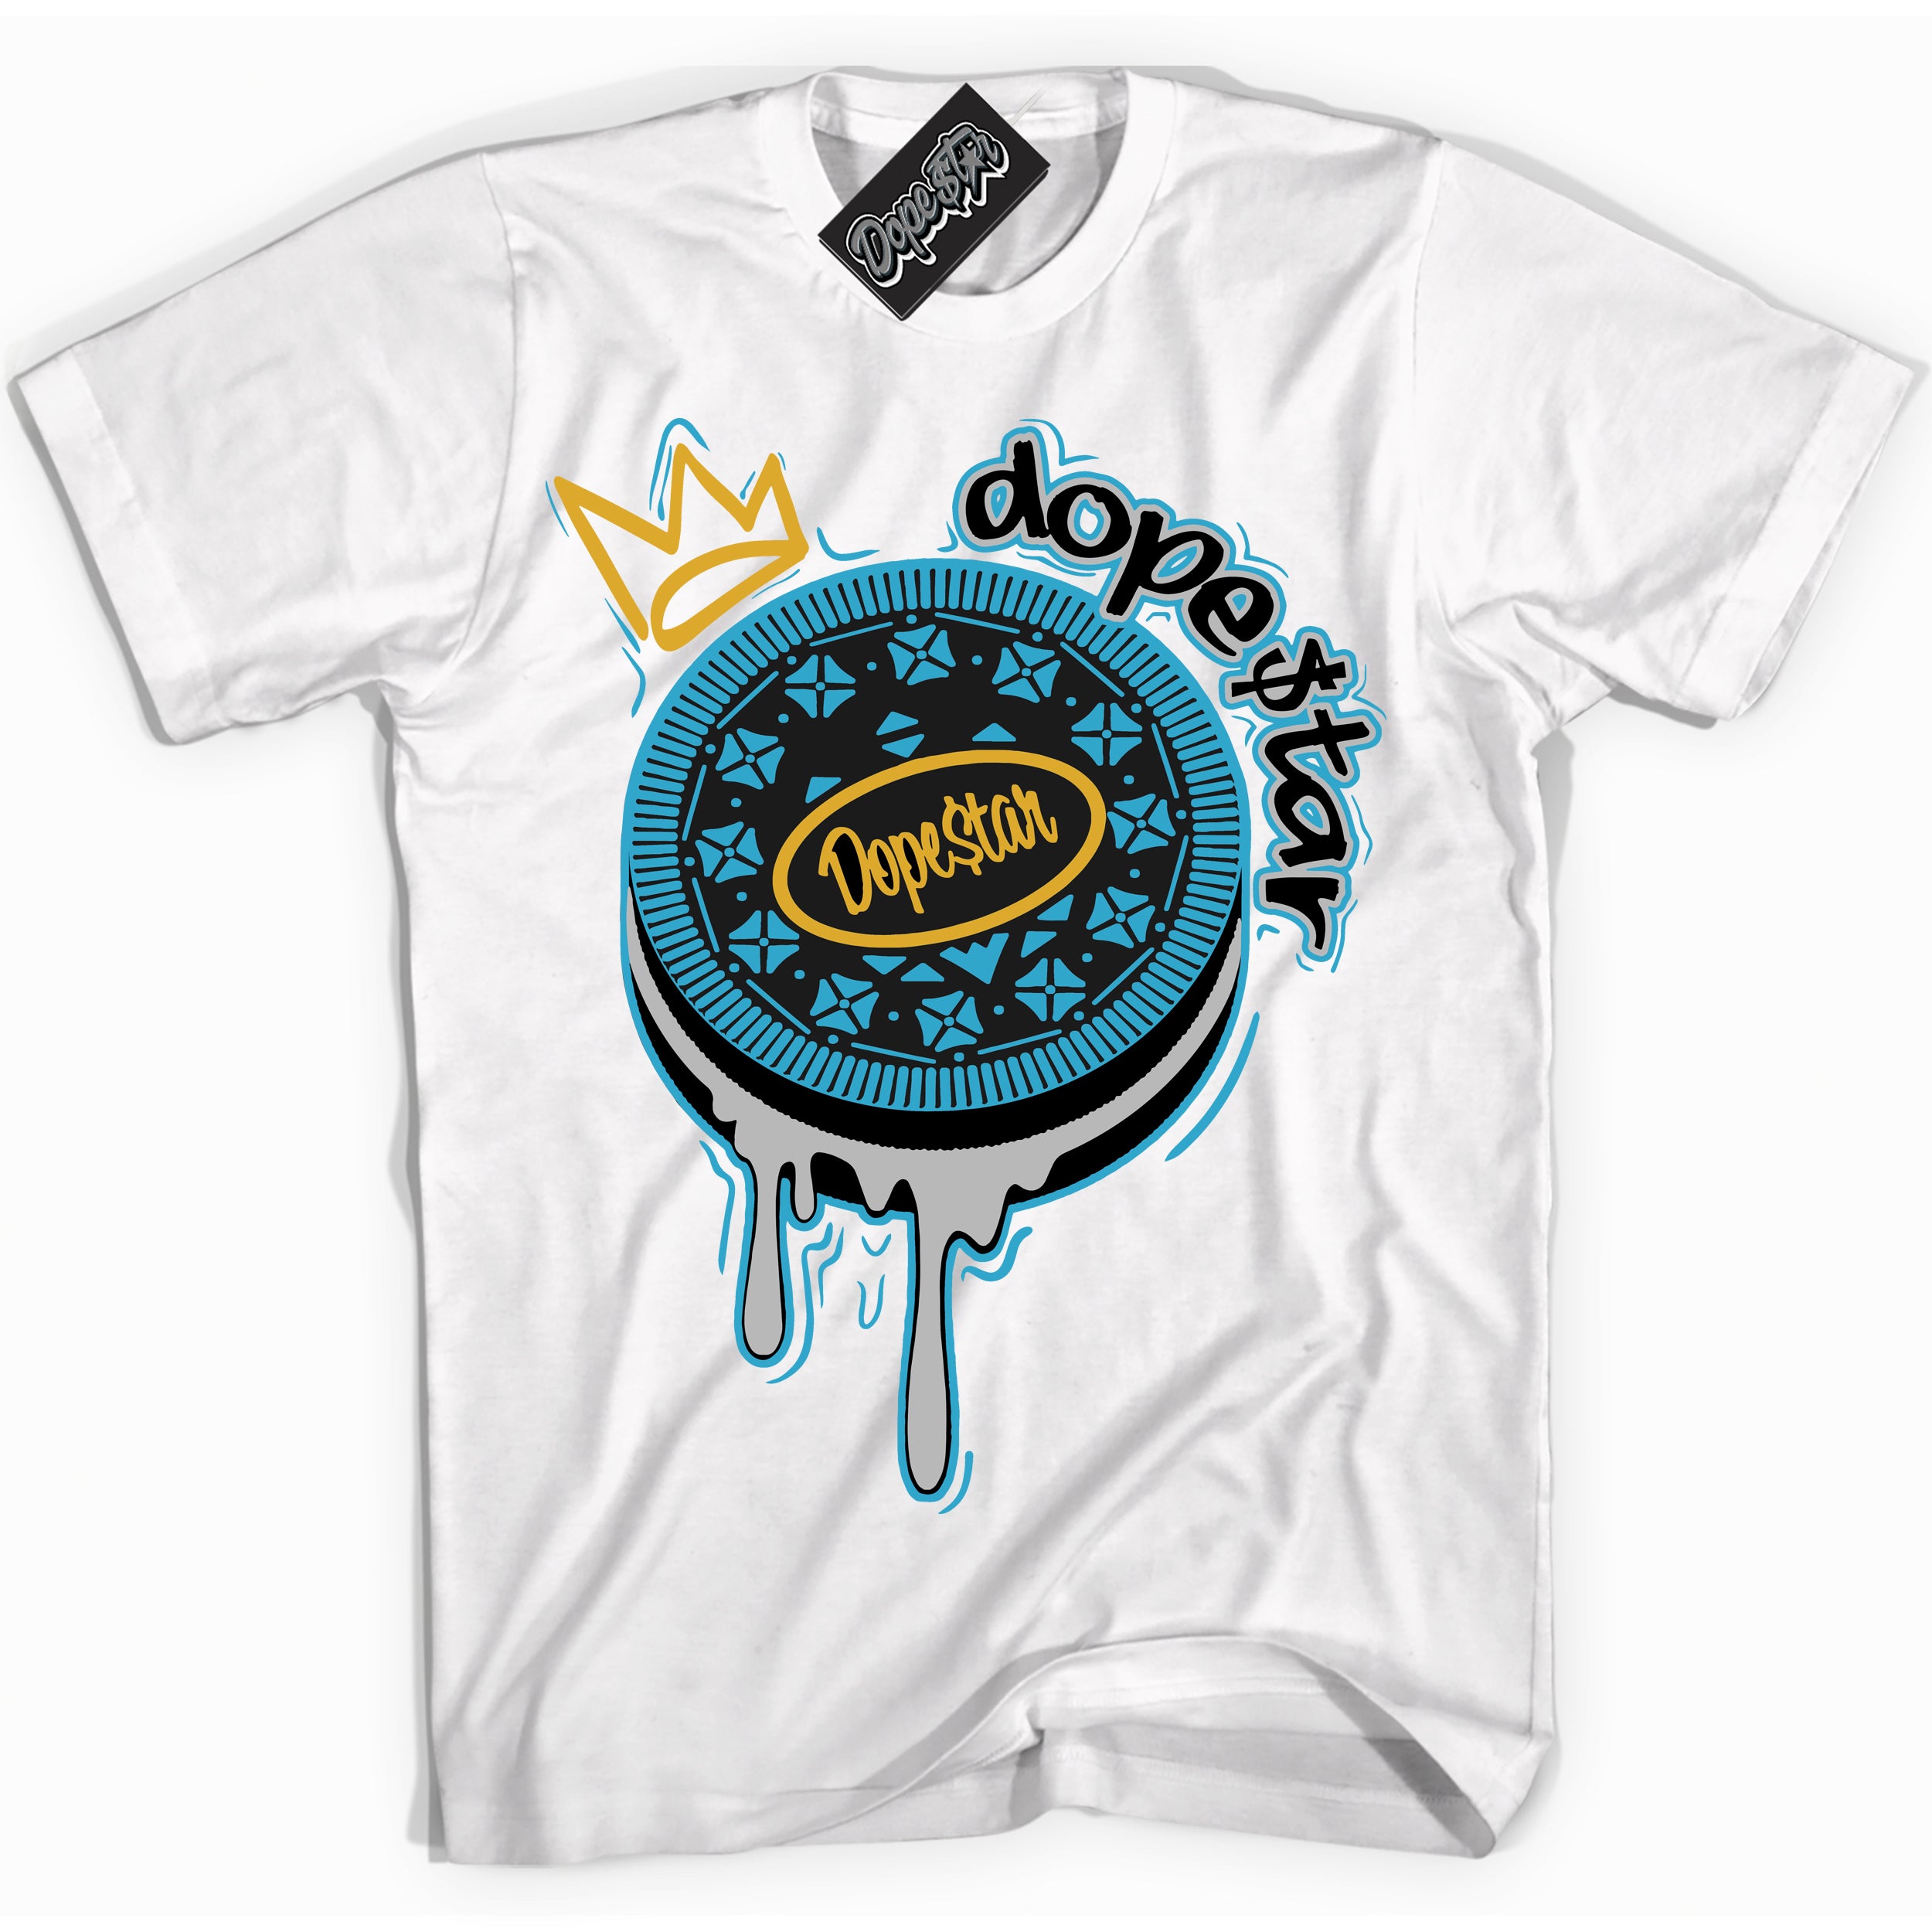 Cool White Shirt with “ Oreo DS” design that perfectly matches Aqua 5s Sneakers.